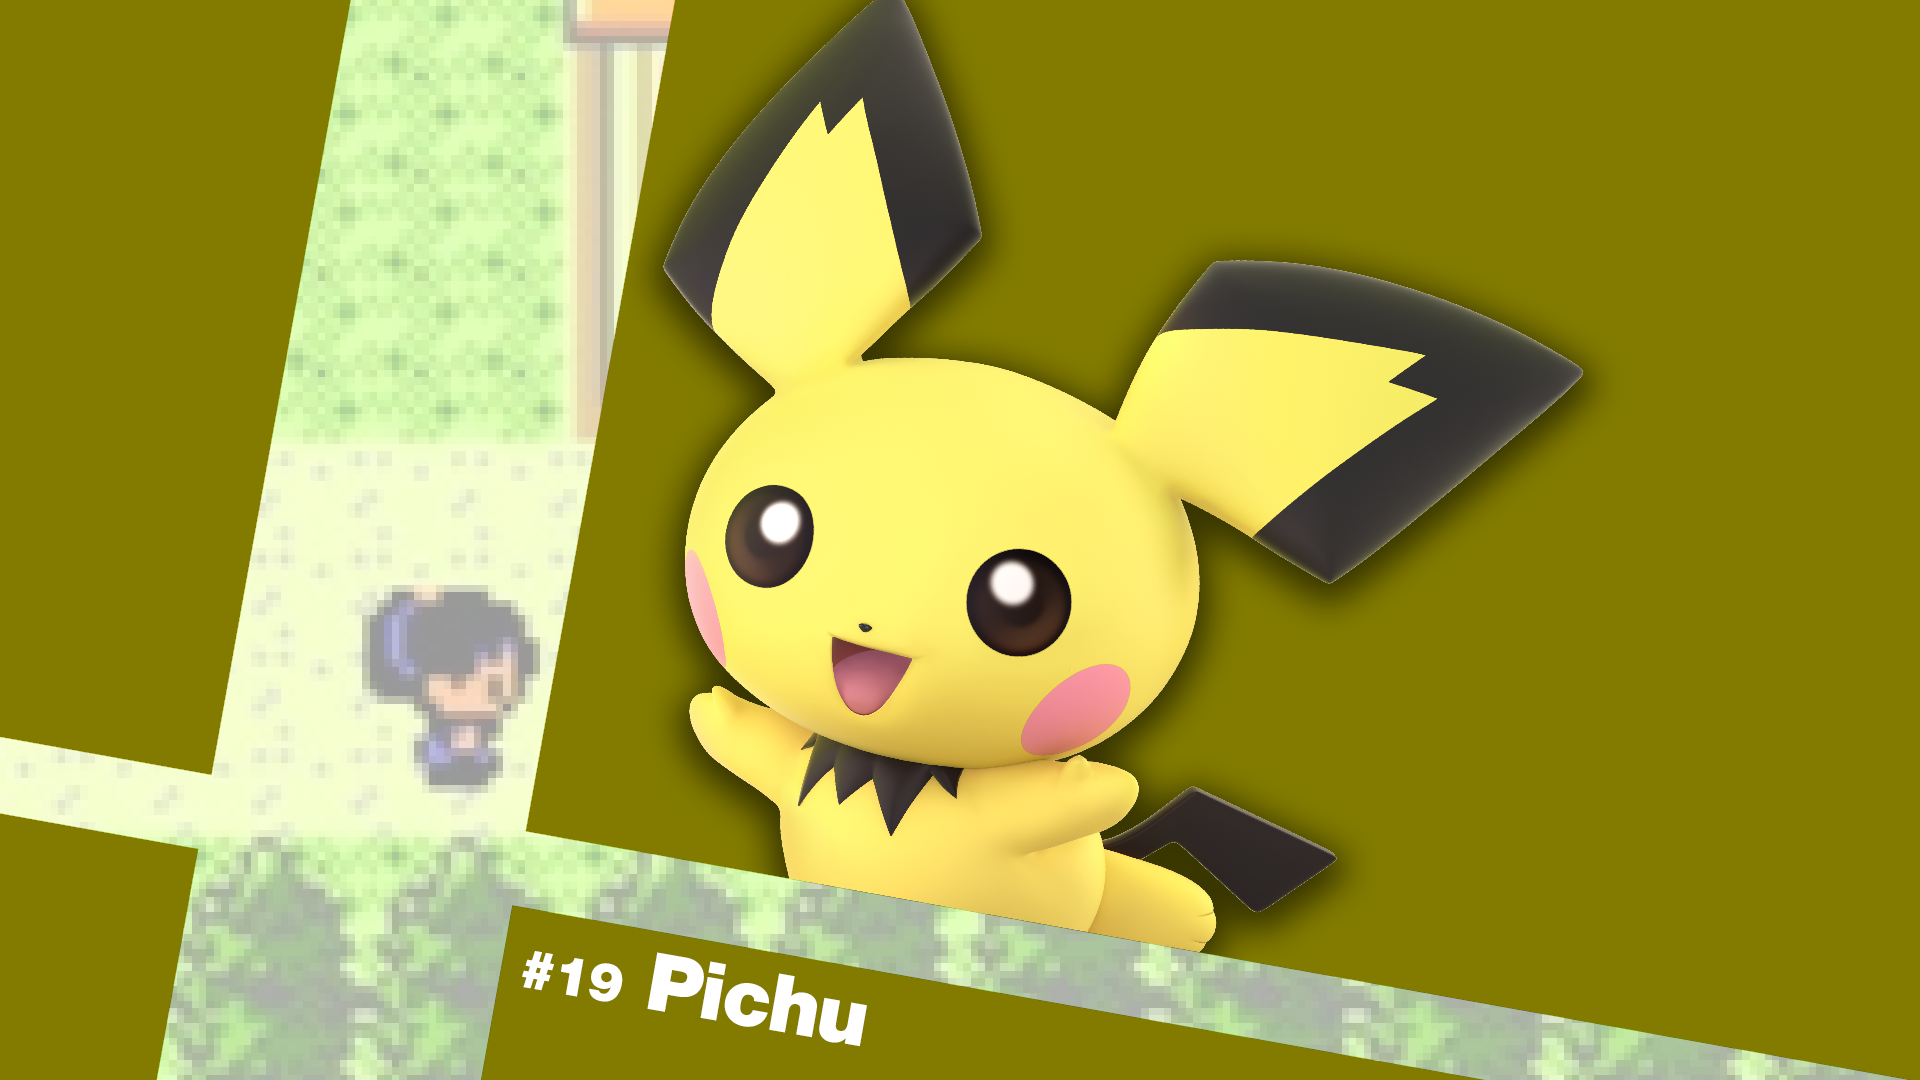 Load 64 More Imagesgrid View - Pichu Smash Bros Ultimate , HD Wallpaper & Backgrounds